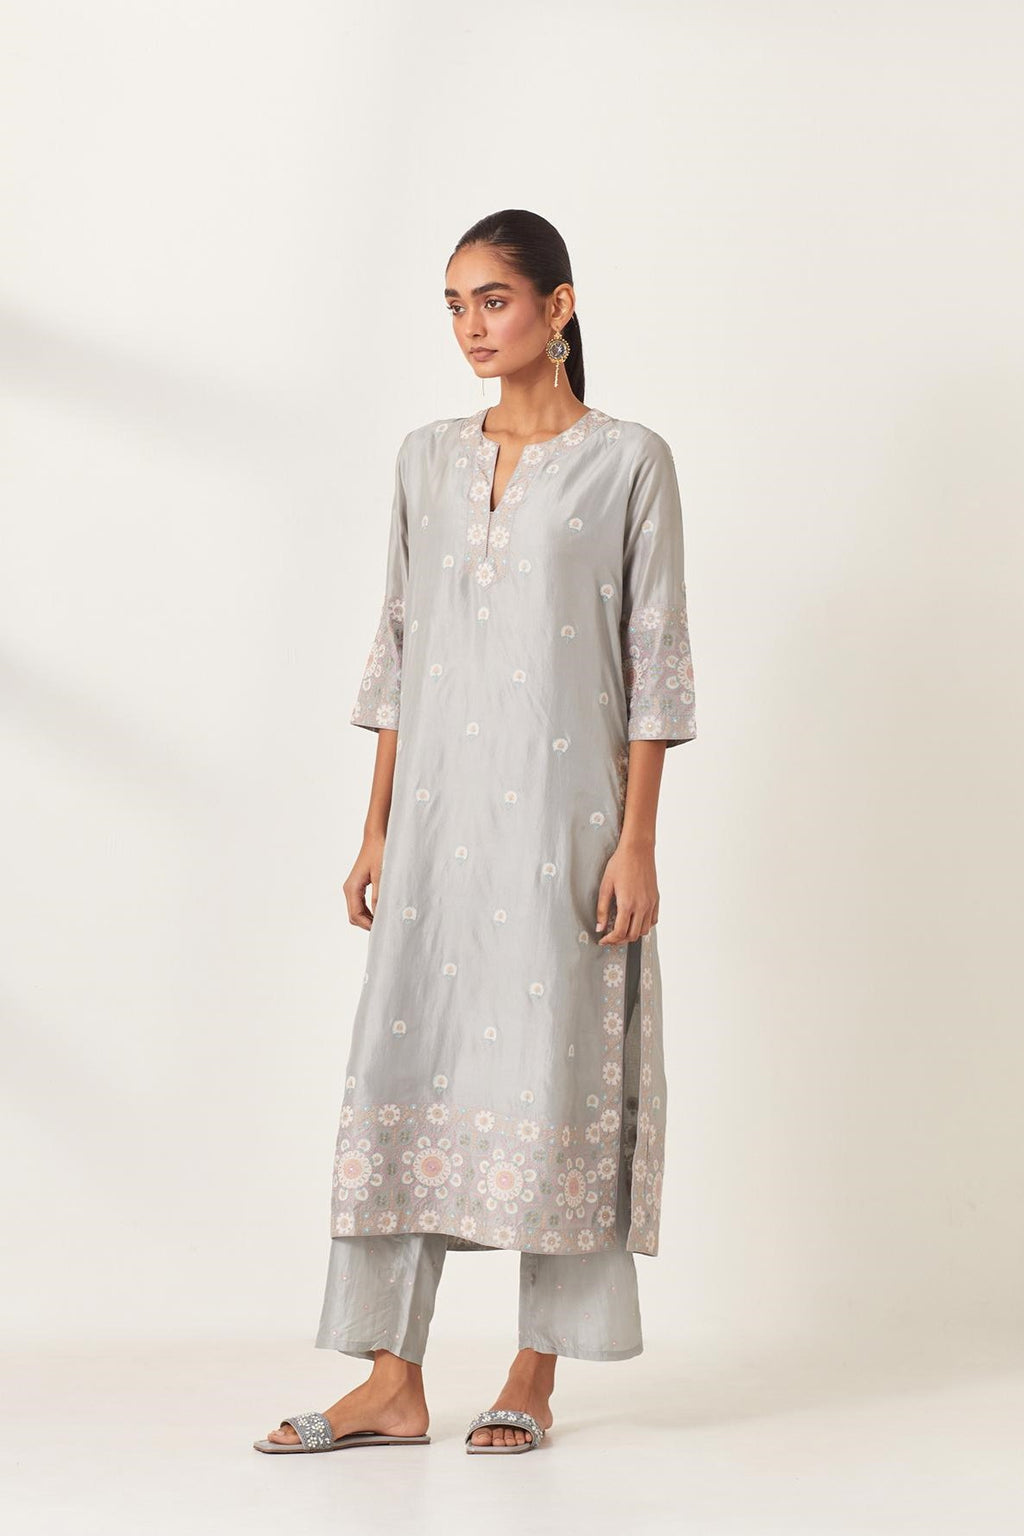 Blue silk kurta set with multi-colored bold appliqué, bootas at borders and aari threadwork, highlighted with sequins.